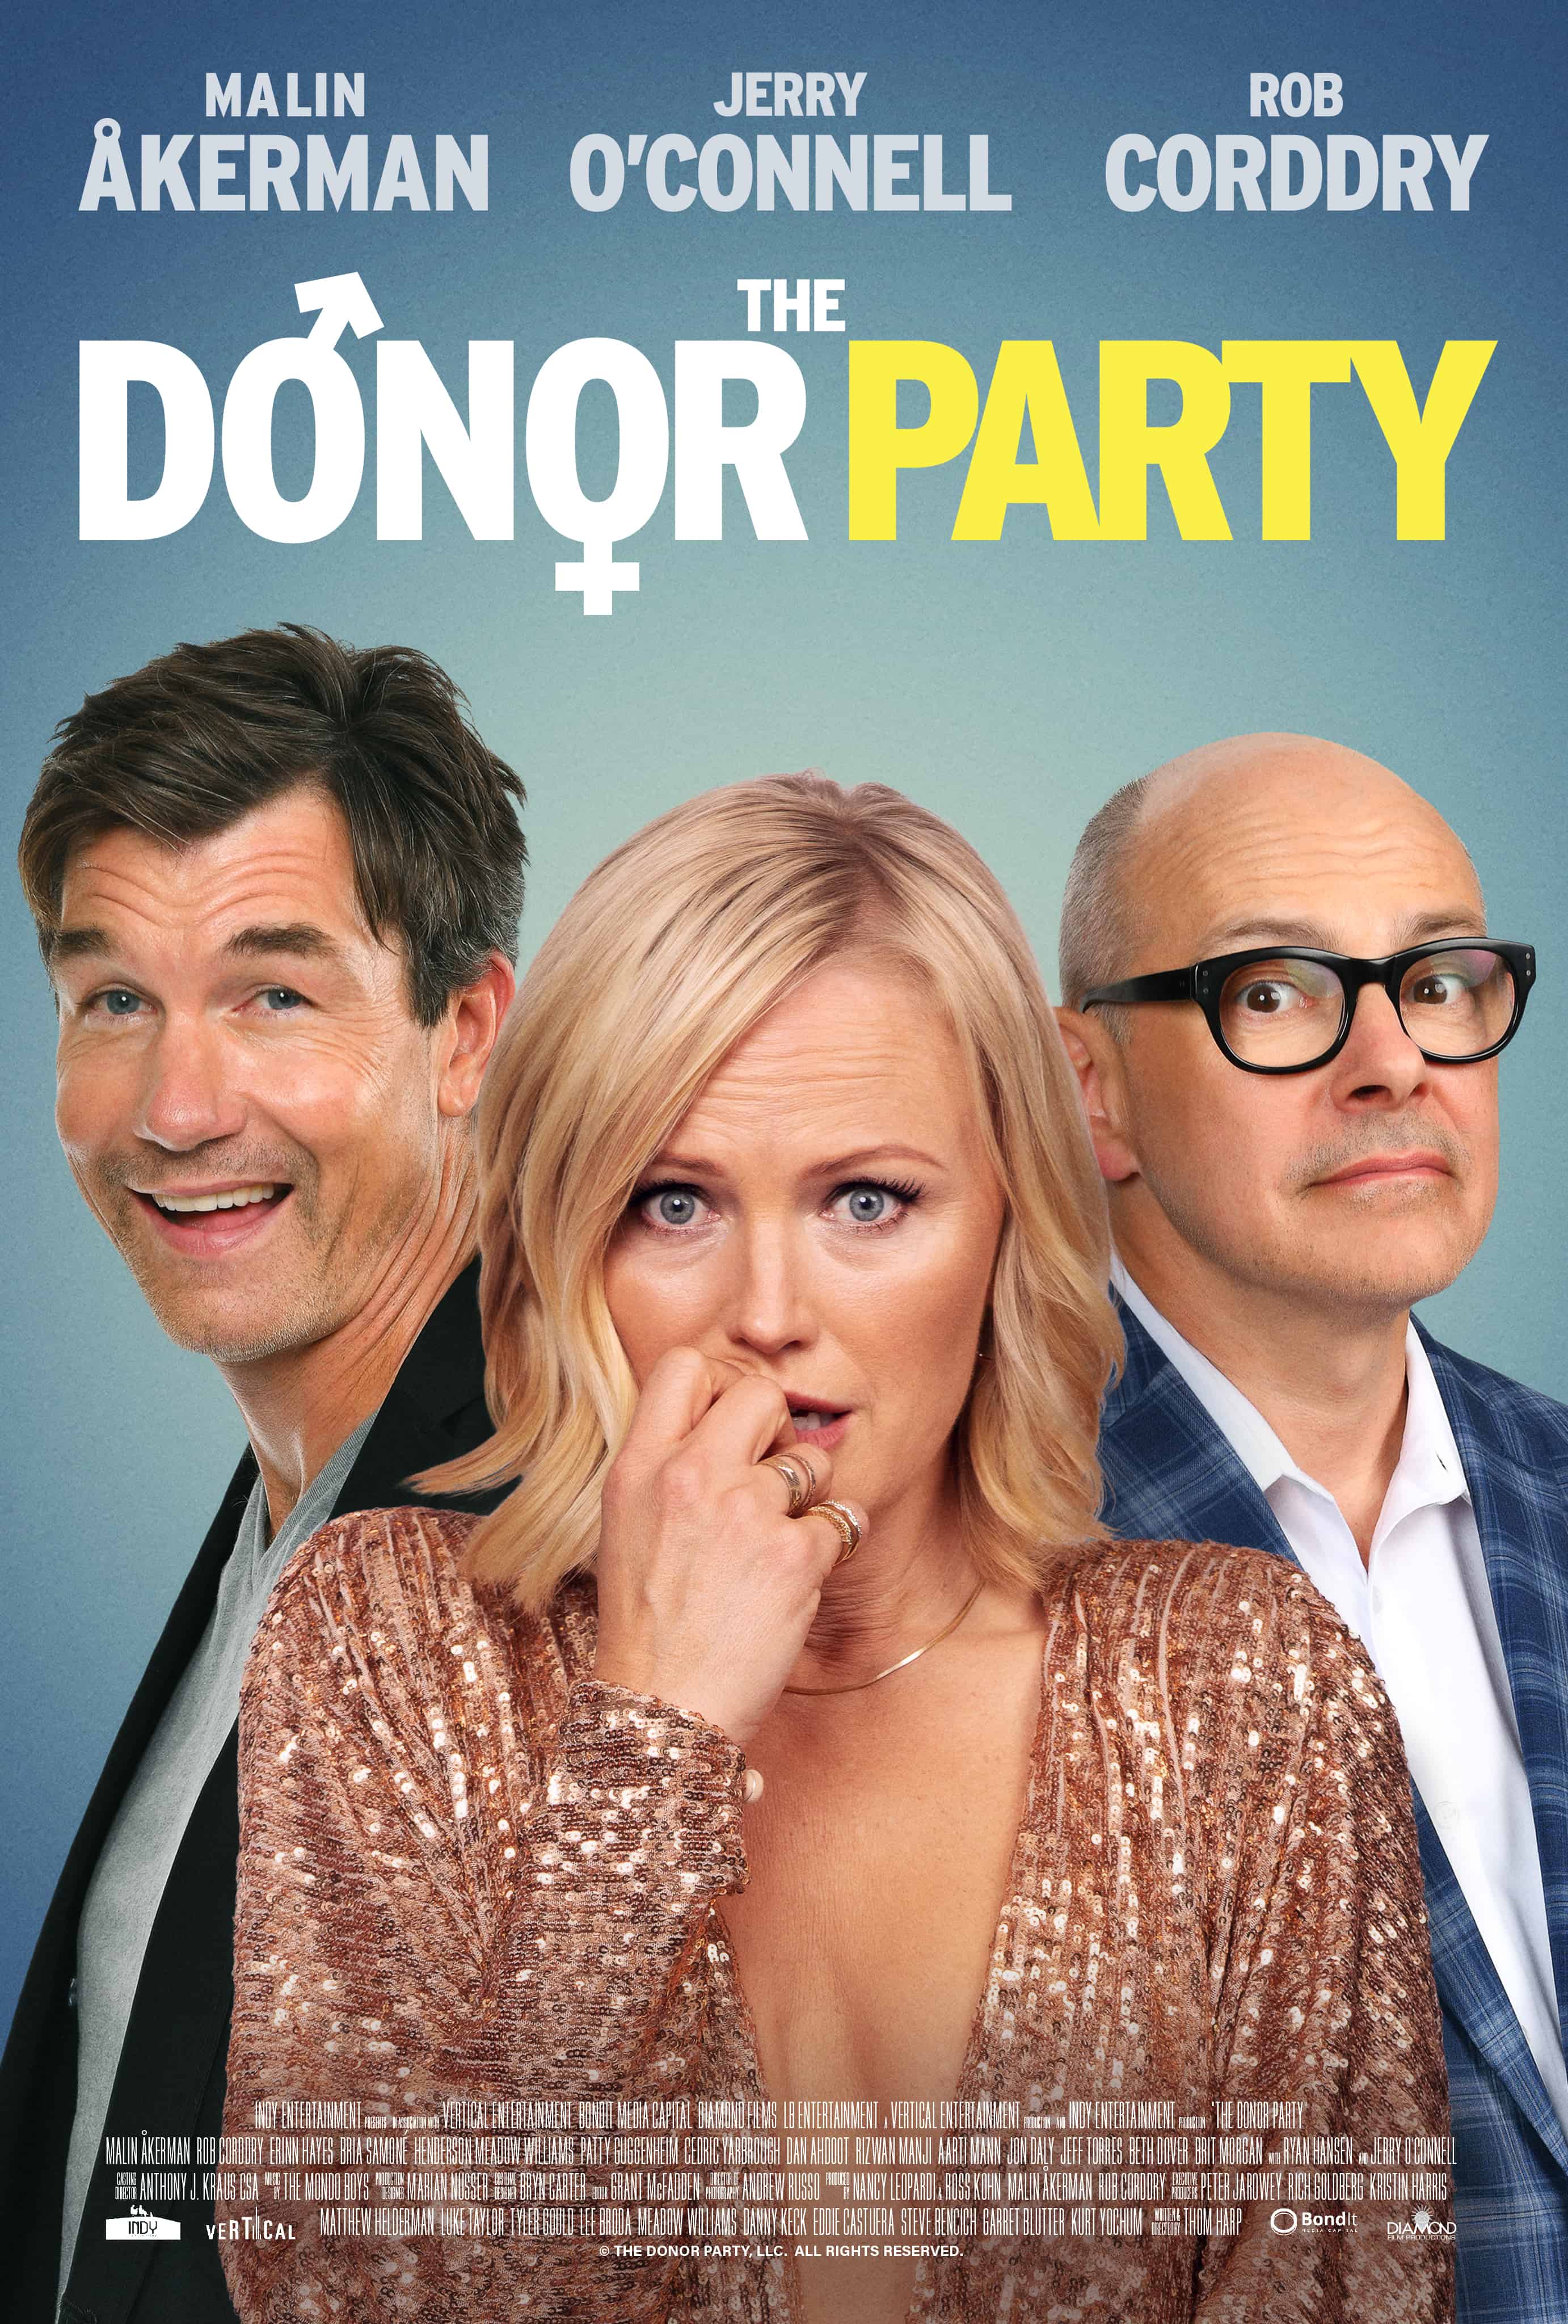 The Donor Party has a new clip! 21